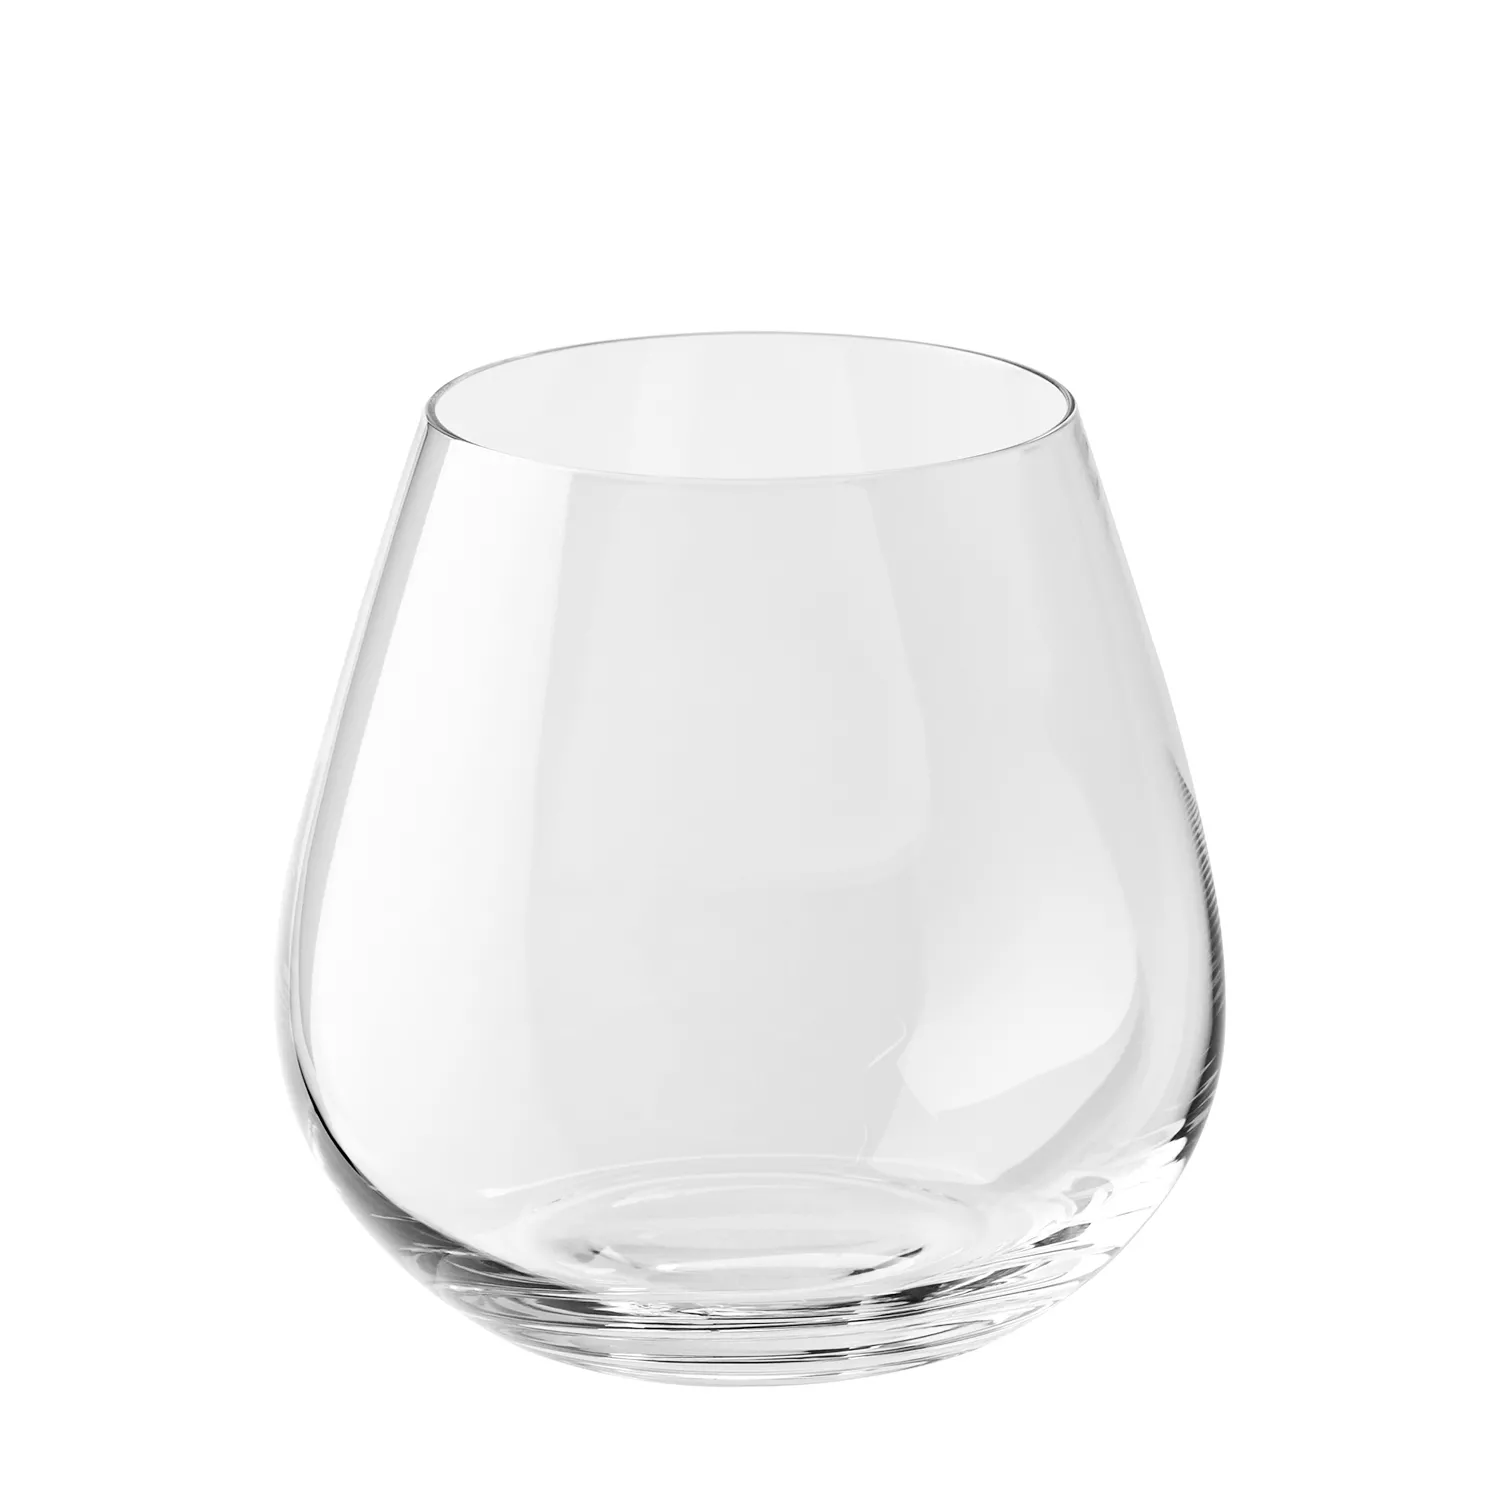 Zwilling Sorrento Double-Wall White Wine Glasses, Set of 2 + Reviews